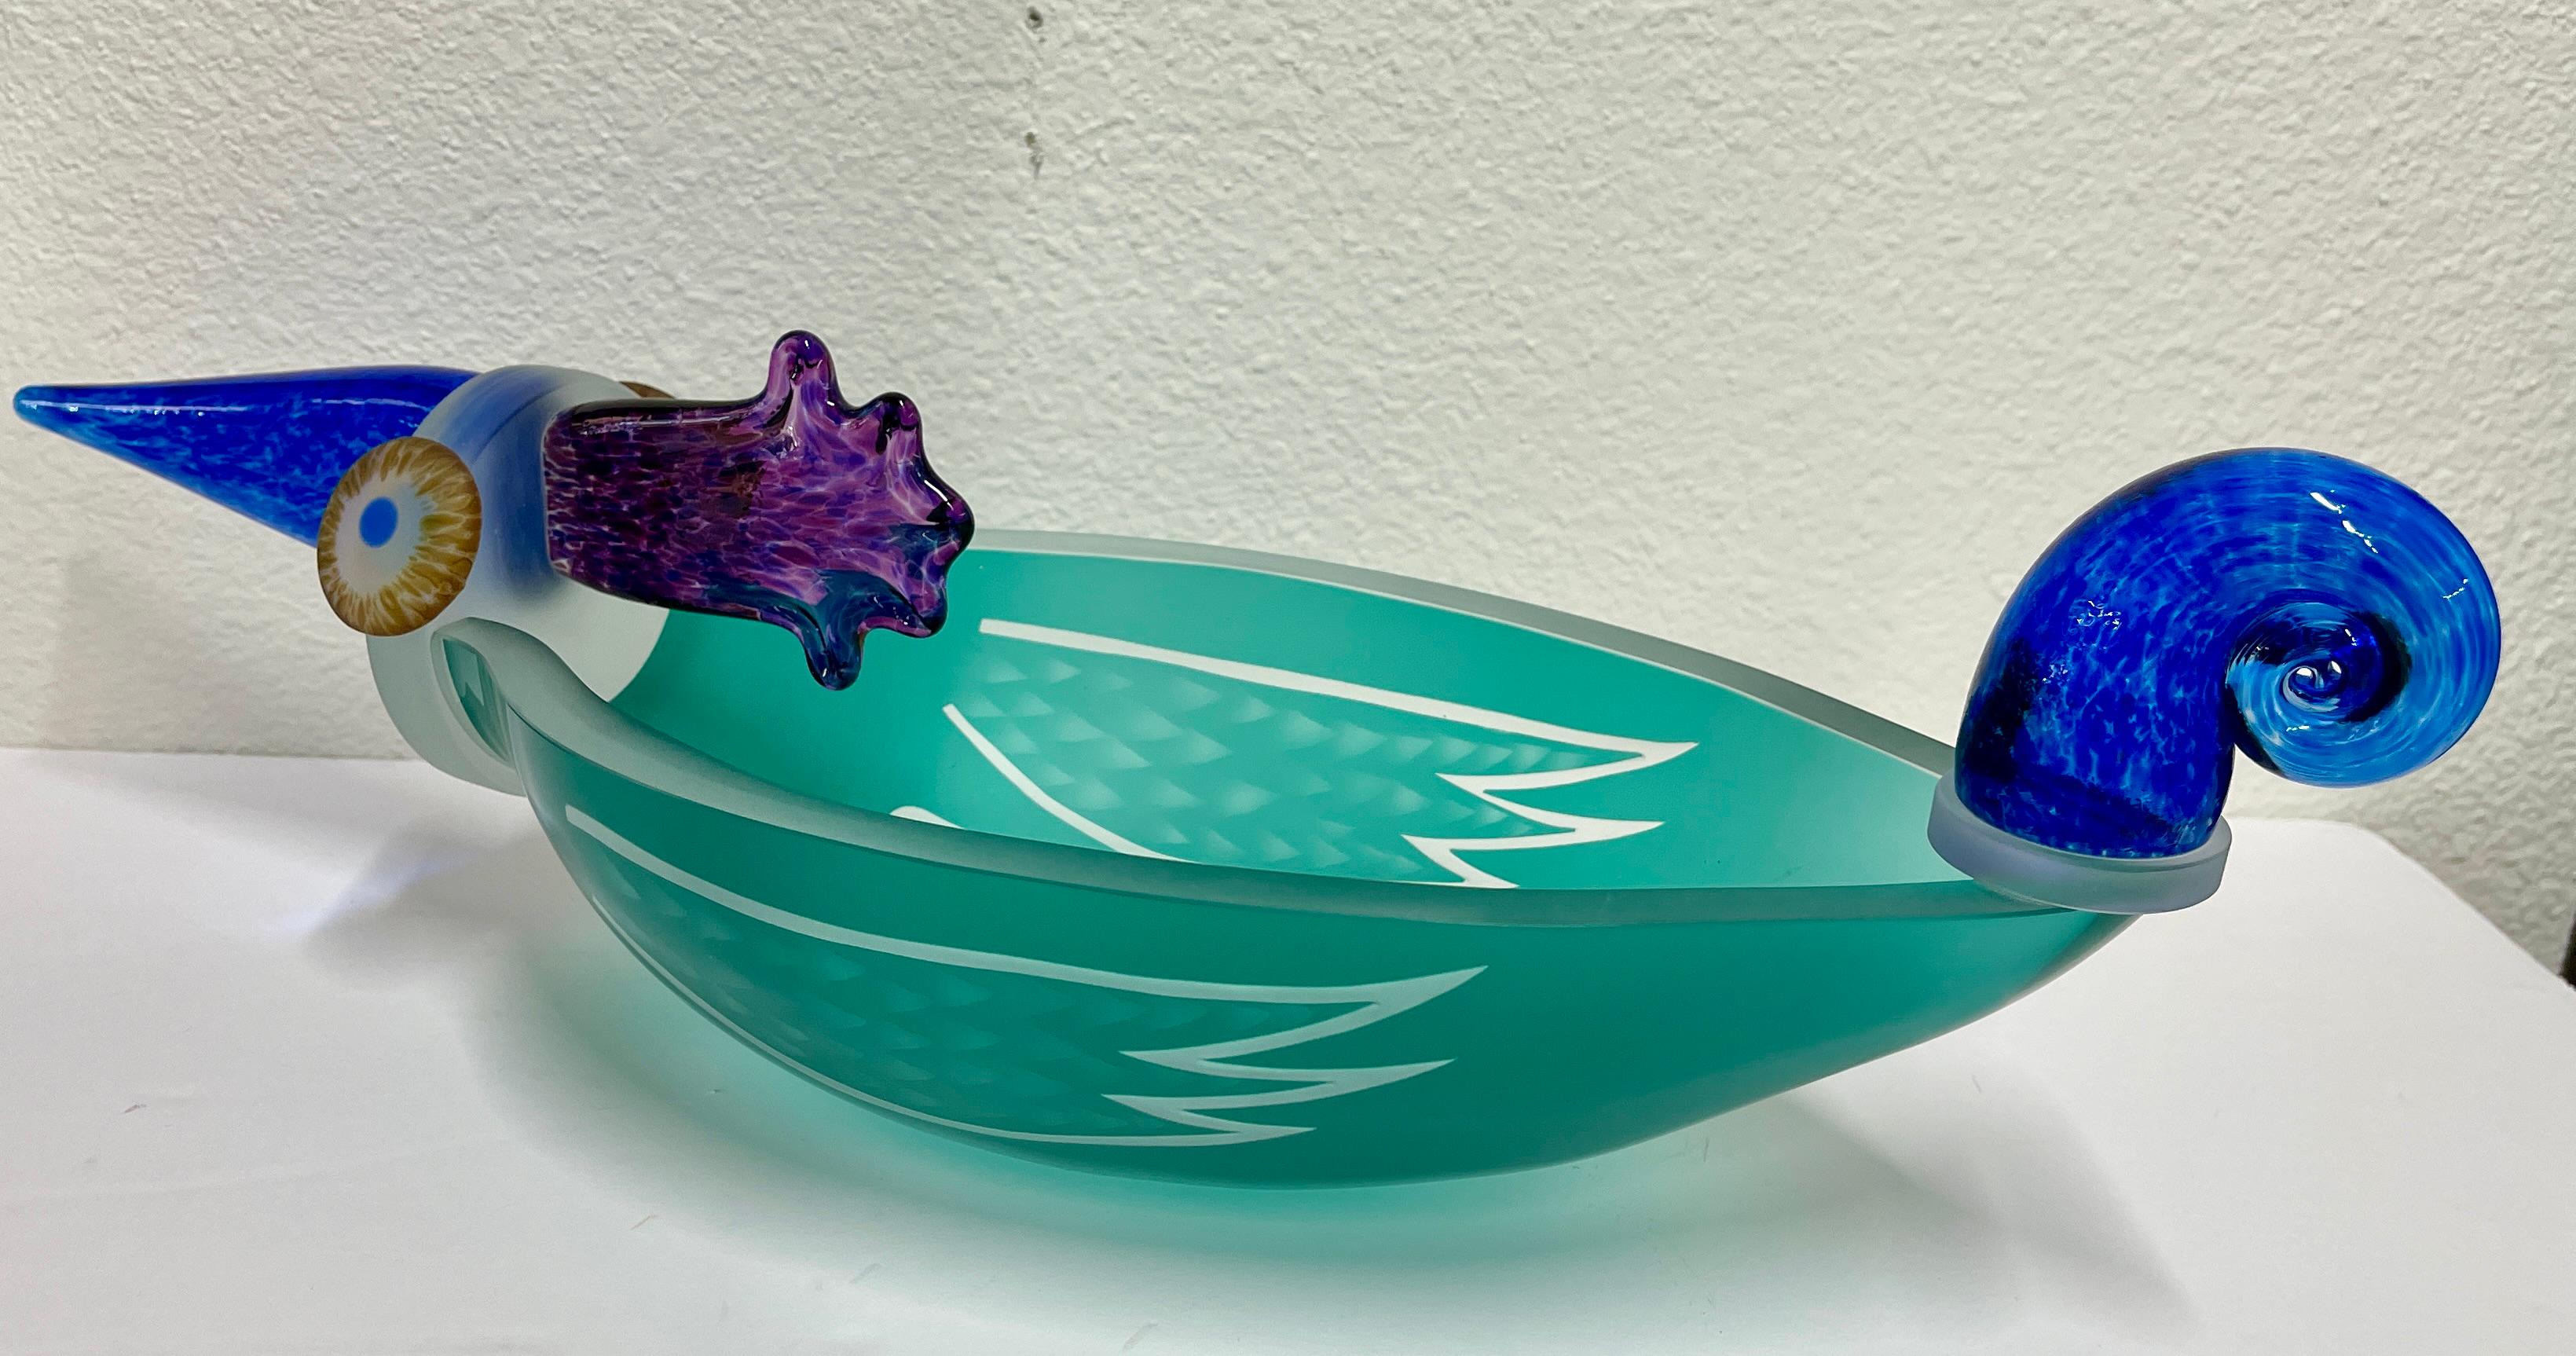 Whimsical art glass piece by the renowned Polish glass studio Borowski. We have a momnumental Stanislaw Borowski piece listed separately. This piece is a cute bird in very good condition. There are a few minor scratches to the base and the label on